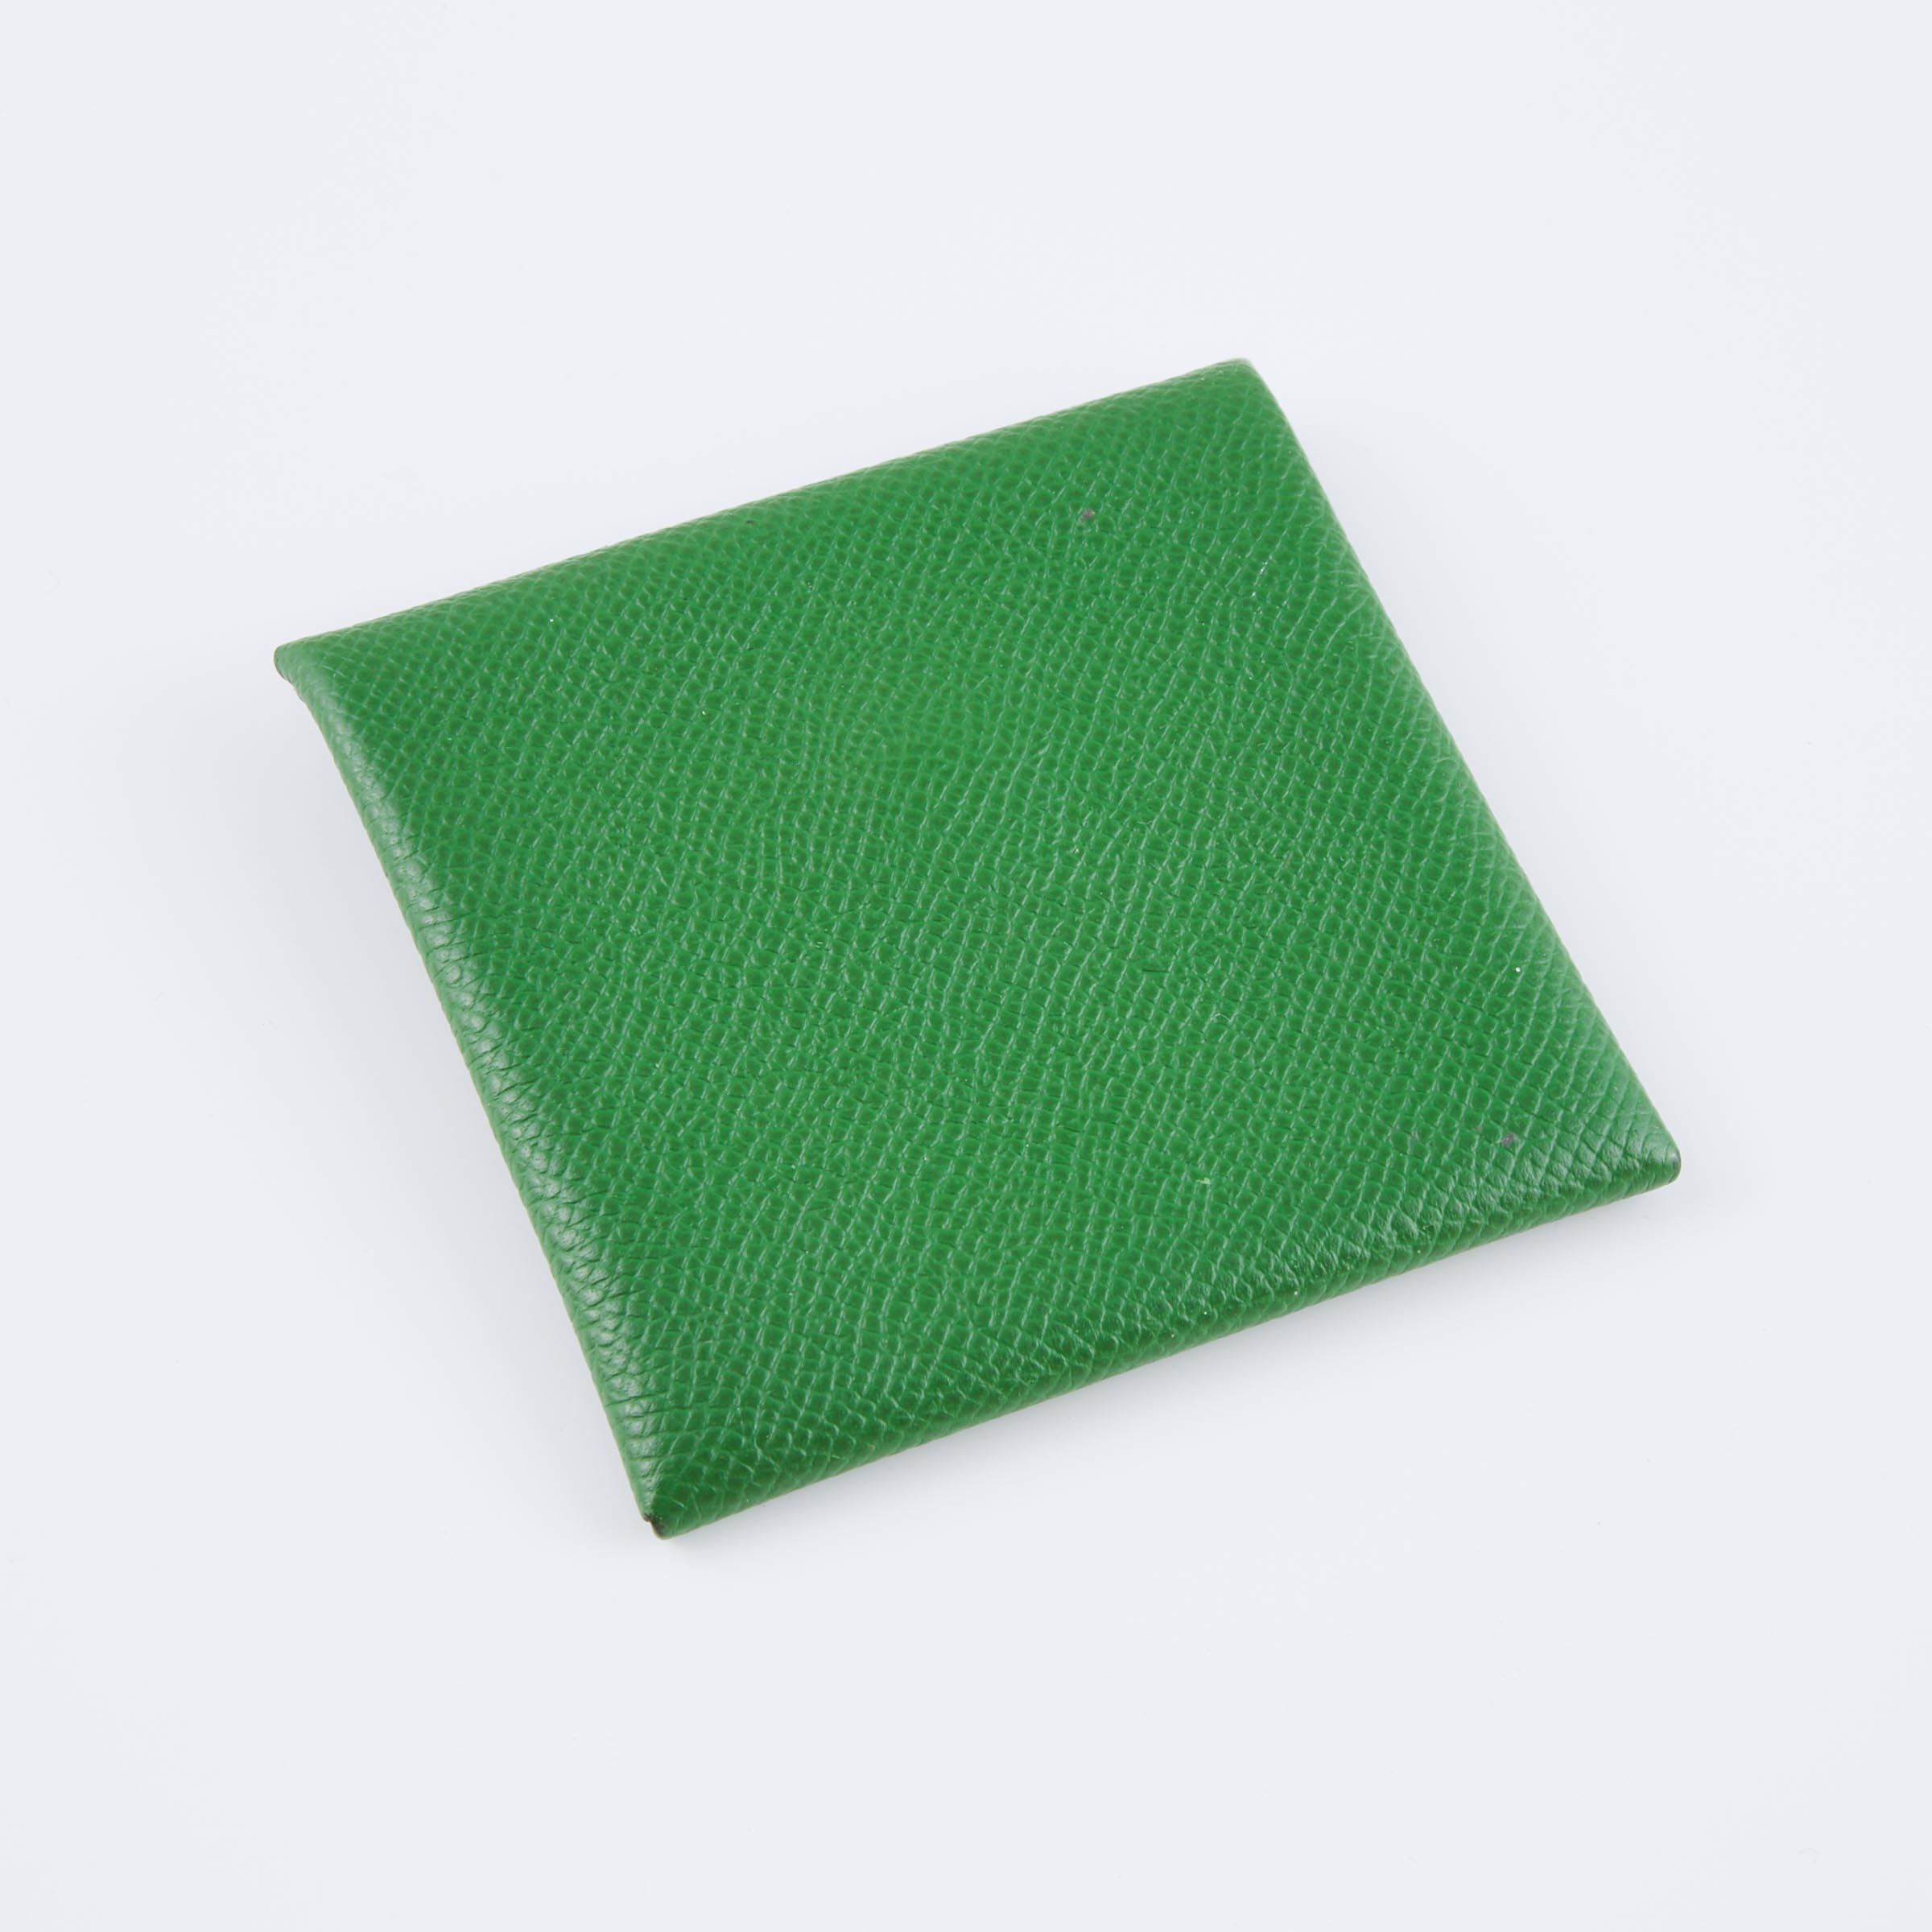 Hermes Bastia Coin Purse in green leather